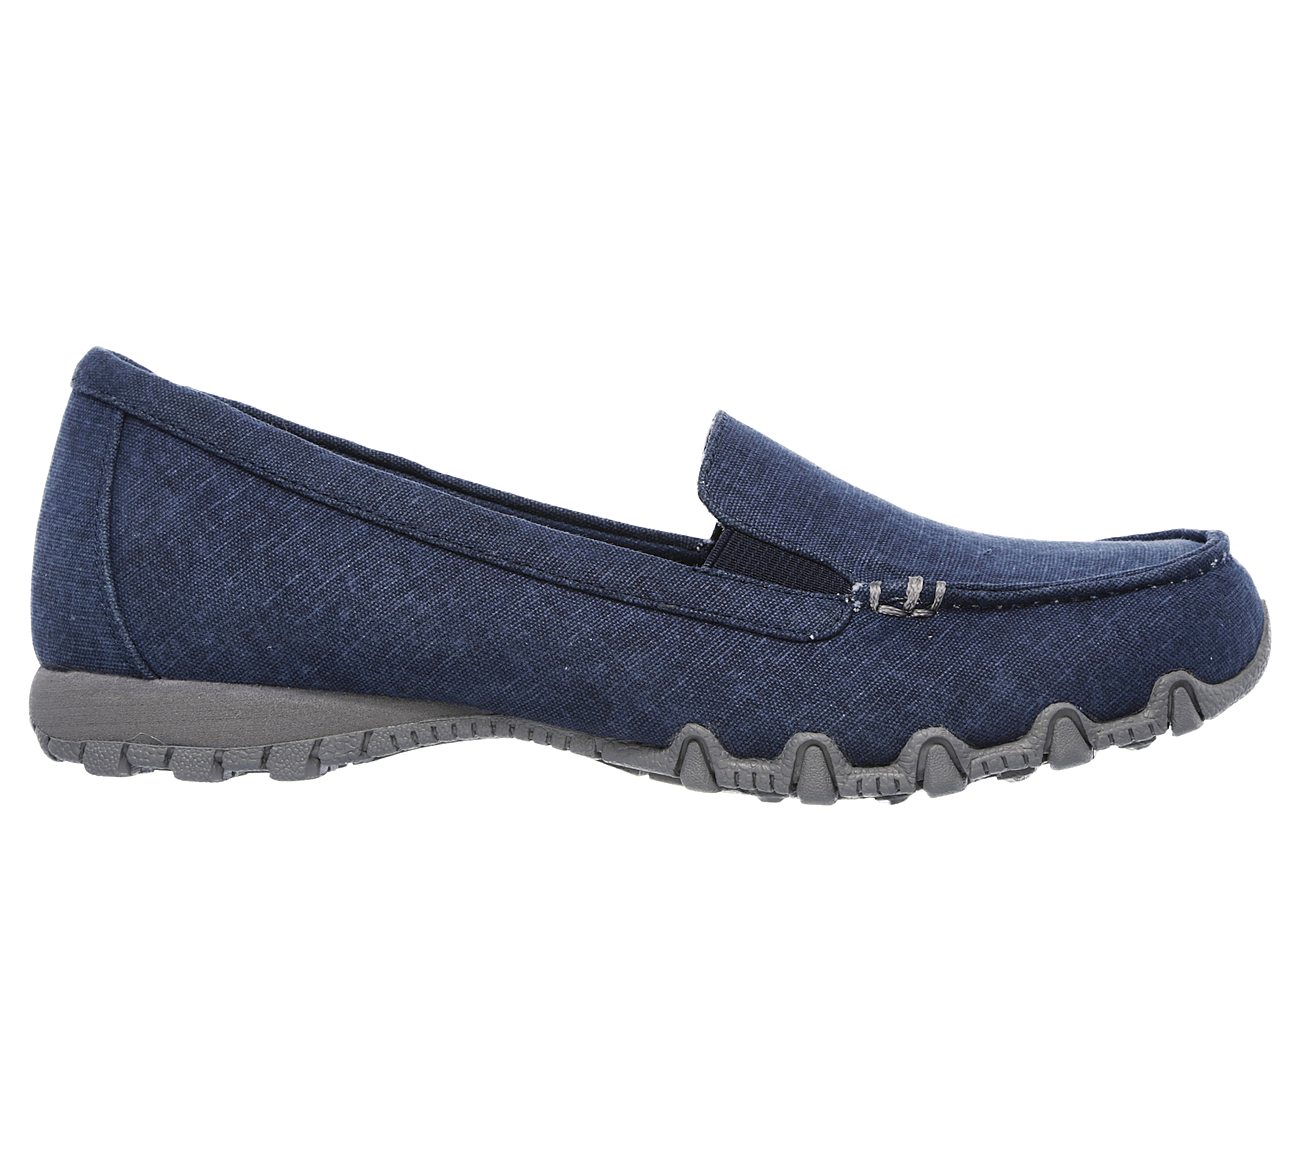 Buy > sketchers womens dress shoes > in stock